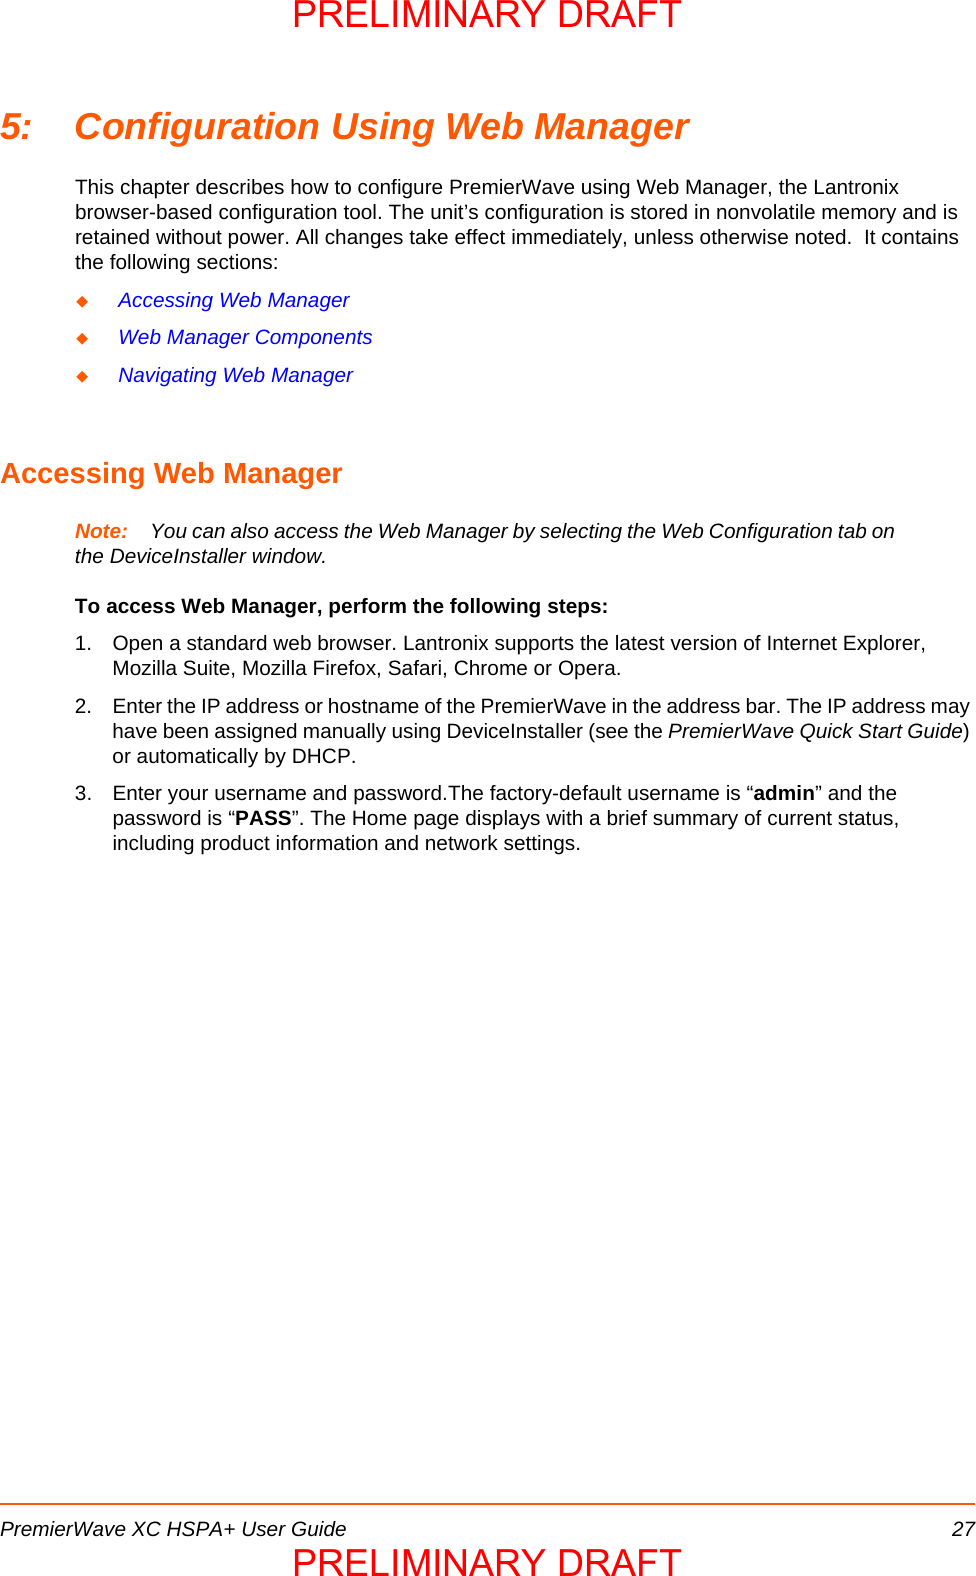 PremierWave XC HSPA+ User Guide 275: Configuration Using Web ManagerThis chapter describes how to configure PremierWave using Web Manager, the Lantronix browser-based configuration tool. The unit’s configuration is stored in nonvolatile memory and is retained without power. All changes take effect immediately, unless otherwise noted.  It contains the following sections: Accessing Web Manager Web Manager Components Navigating Web ManagerAccessing Web ManagerNote: You can also access the Web Manager by selecting the Web Configuration tab on the DeviceInstaller window.To access Web Manager, perform the following steps:1. Open a standard web browser. Lantronix supports the latest version of Internet Explorer, Mozilla Suite, Mozilla Firefox, Safari, Chrome or Opera. 2. Enter the IP address or hostname of the PremierWave in the address bar. The IP address may have been assigned manually using DeviceInstaller (see the PremierWave Quick Start Guide) or automatically by DHCP. 3. Enter your username and password.The factory-default username is “admin” and the password is “PASS”. The Home page displays with a brief summary of current status, including product information and network settings.PRELIMINARY DRAFTPRELIMINARY DRAFT